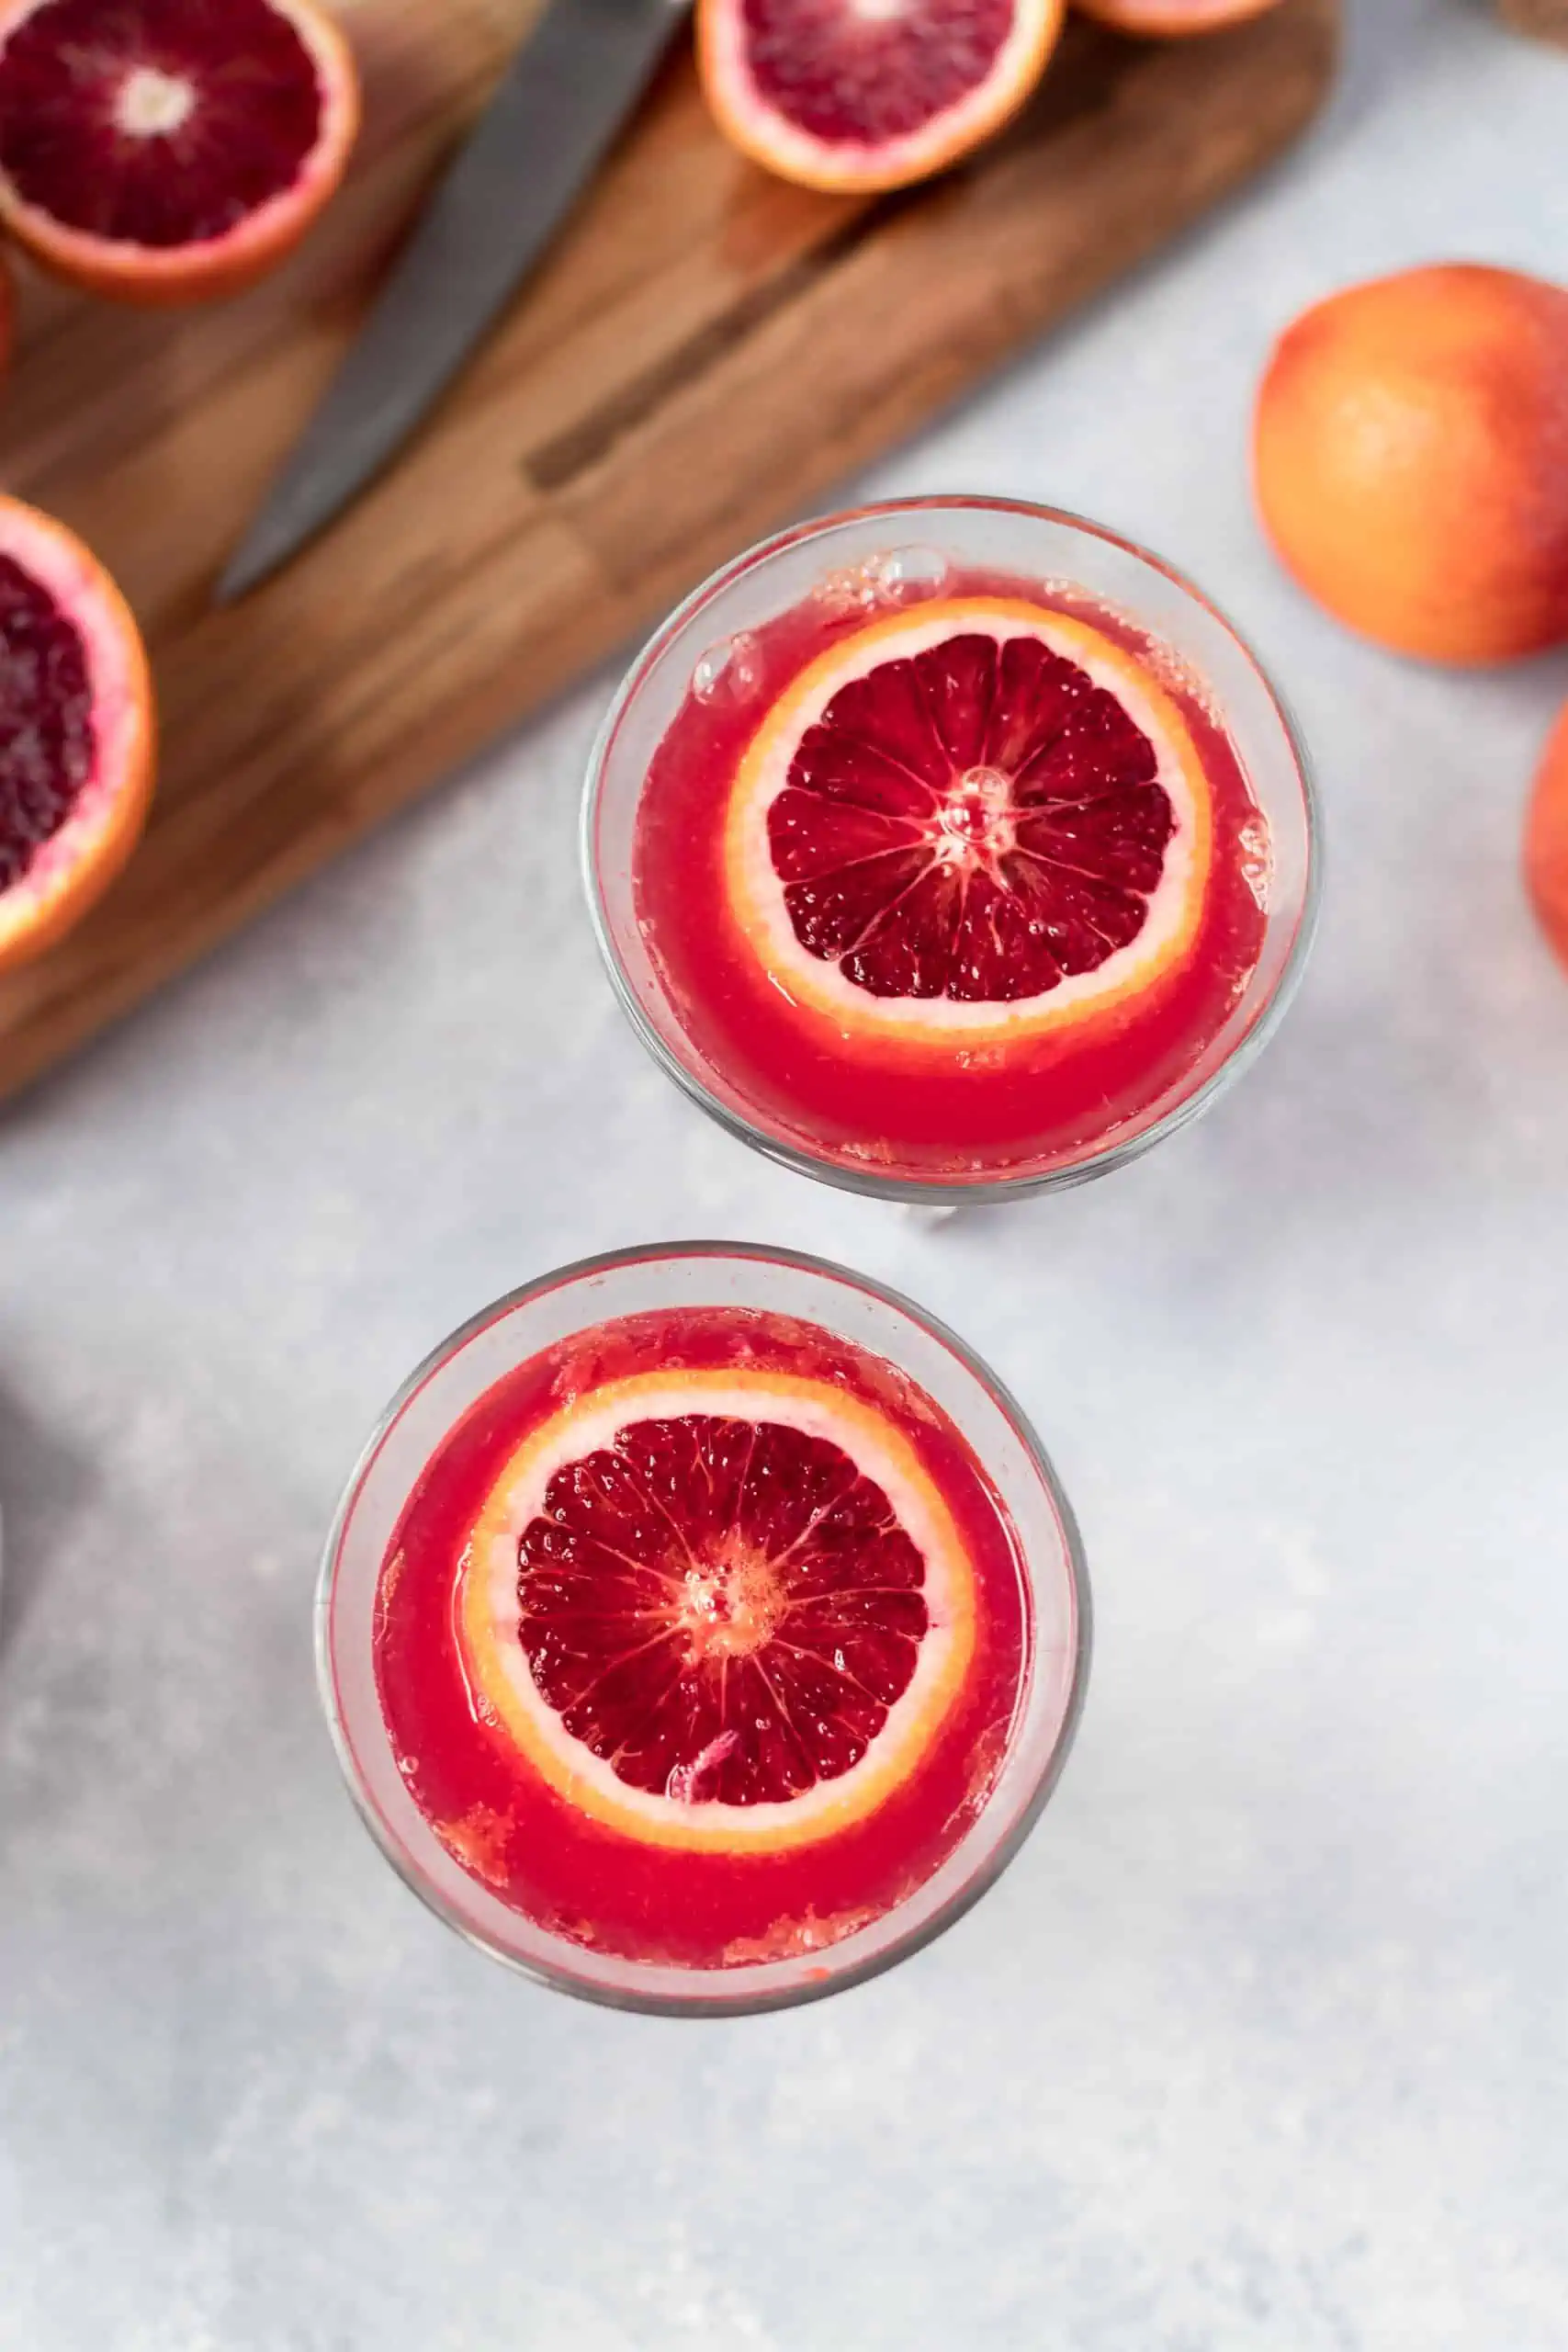 two glasses filled with blood orange juice and champagne and garnished with a sliced blood orange.